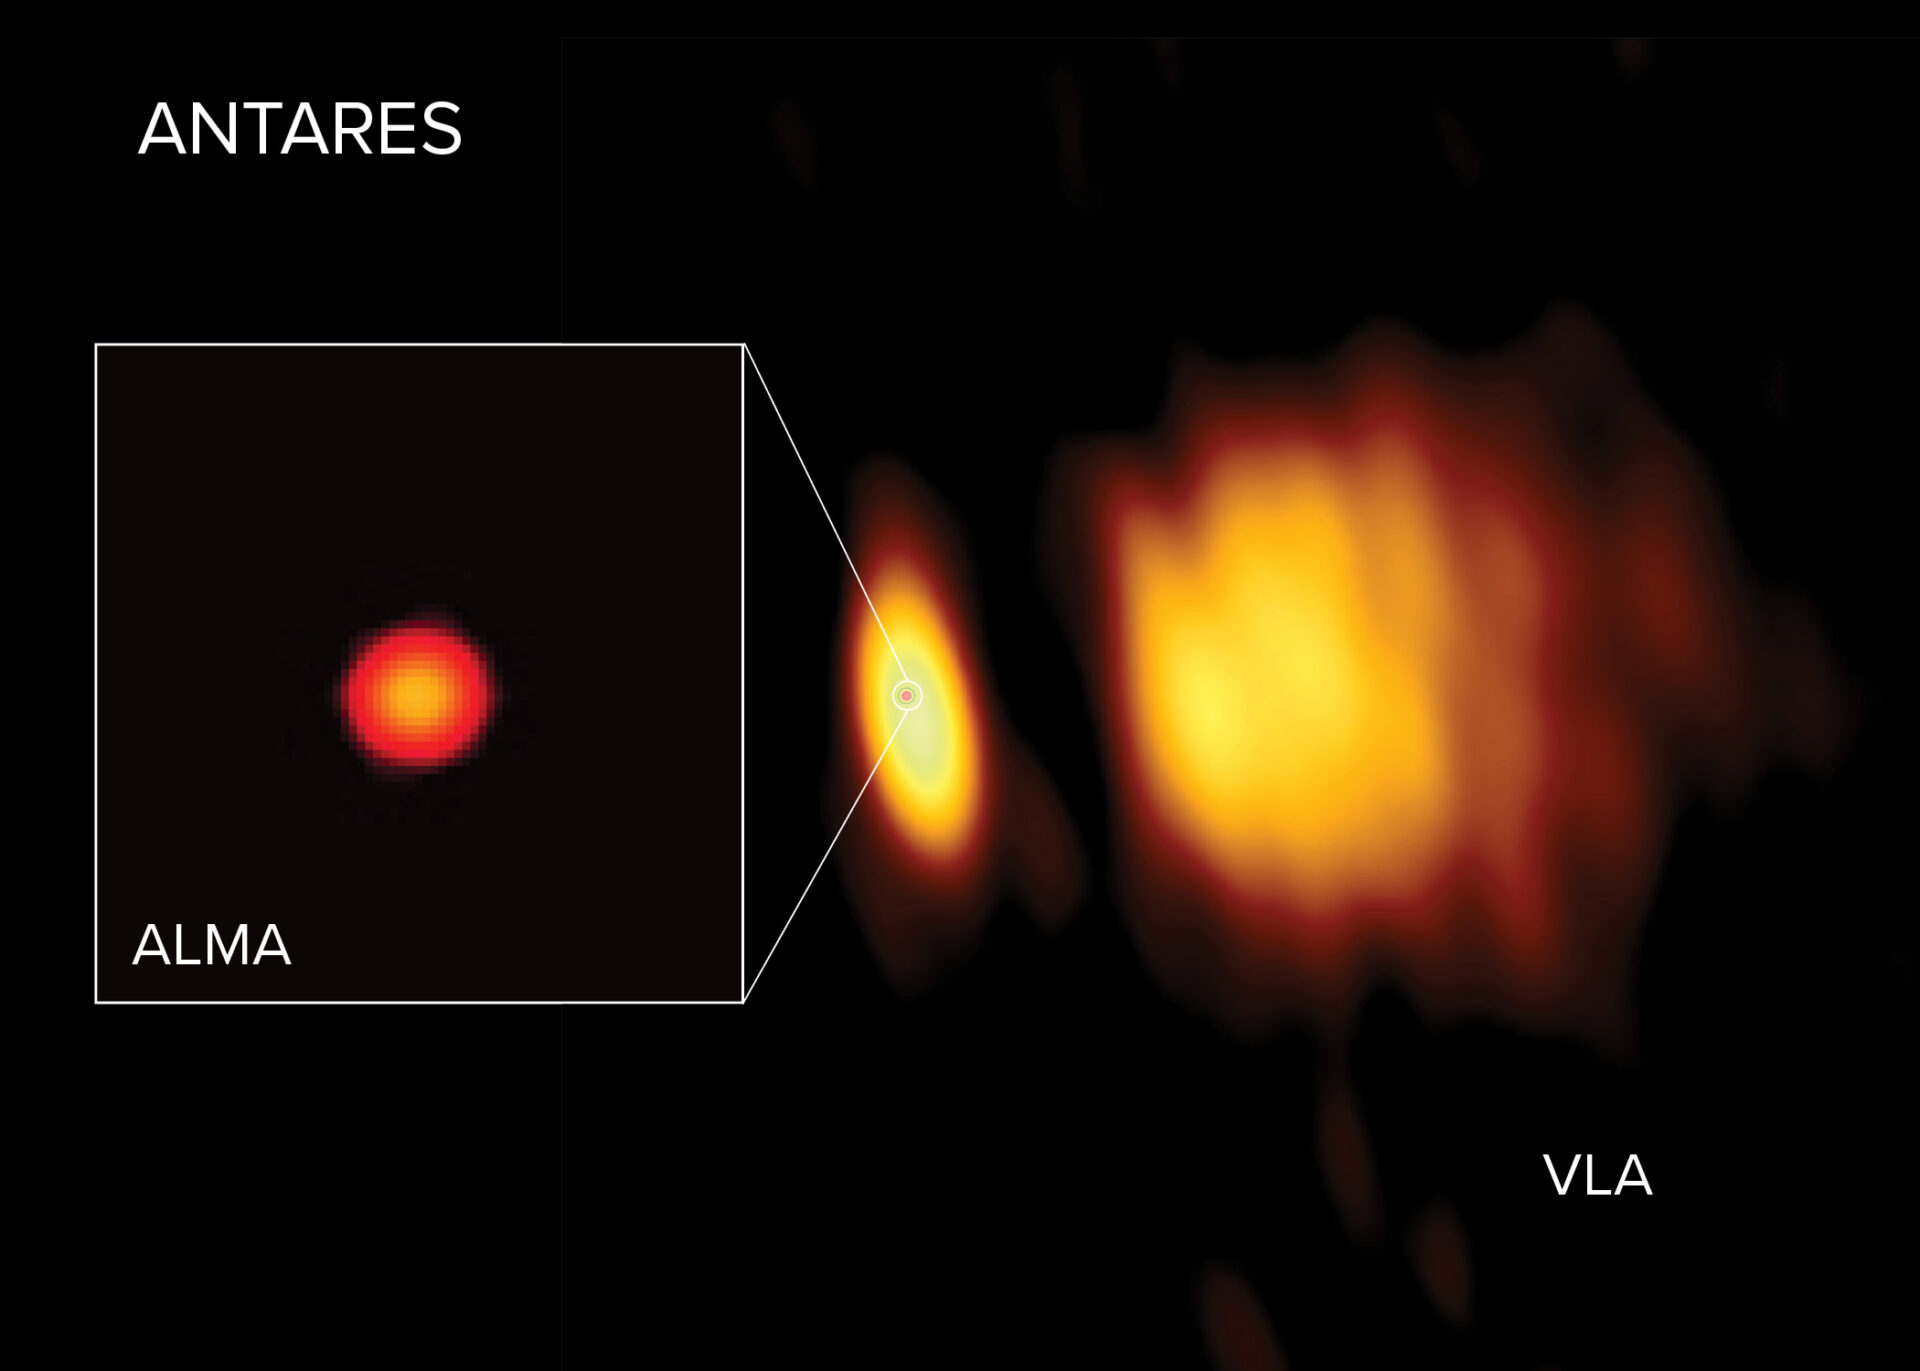 Radio images of Antares with ALMA and the VLA. ALMA observed Antares close to its surface in shorter wavelengths, and the longer wavelengths observed by the VLA revealed the star’s atmosphere further out. In the VLA image a huge wind is visible on the right, ejected from Antares and lit up by its smaller but hotter companion star Antares B. Credit: ALMA (ESO/NAOJ/NRAO), E. O’Gorman; NRAO/AUI/NSF, S. Dagnello